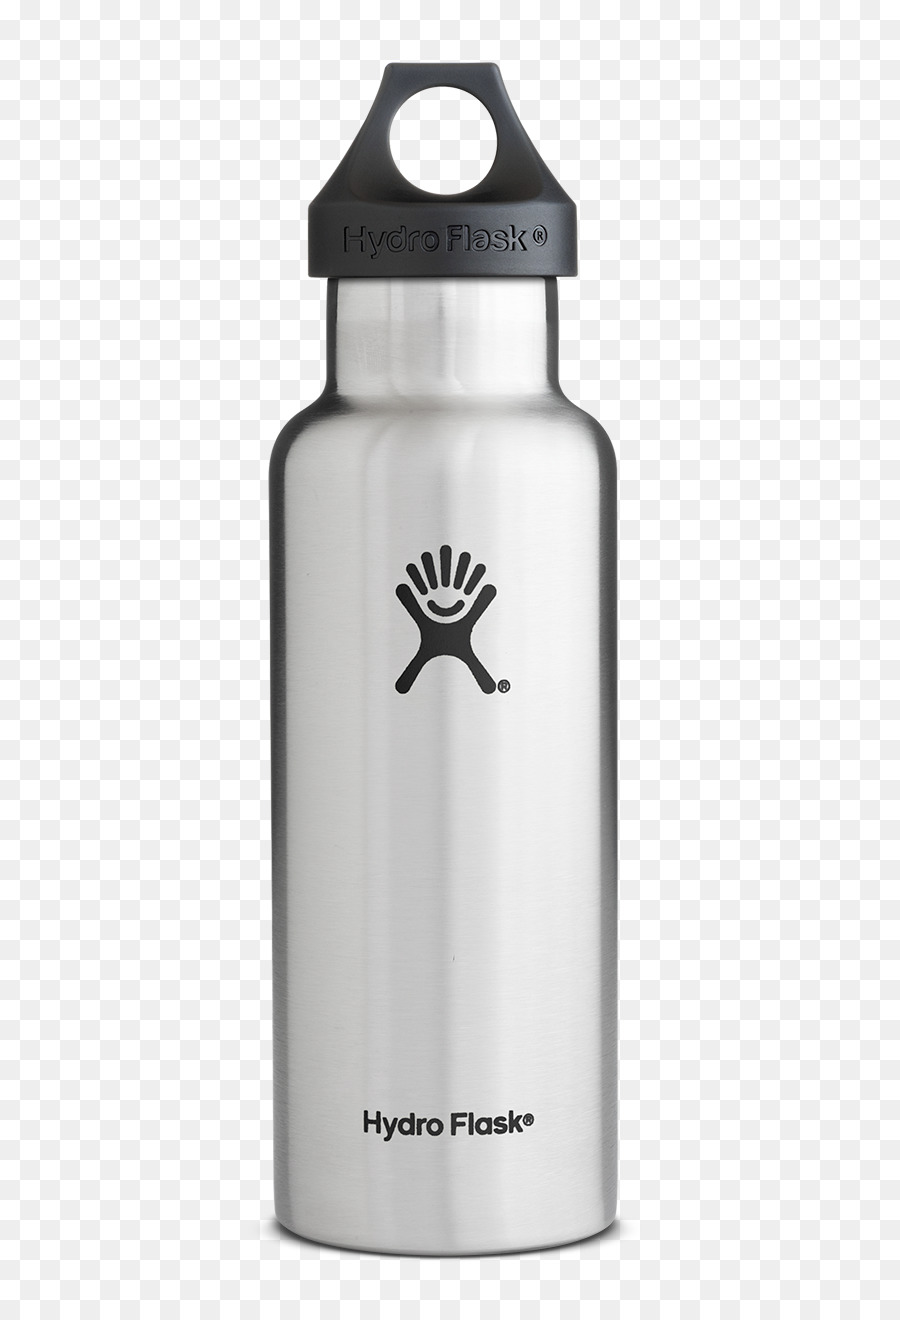 https://banner2.cleanpng.com/20180522/tq/kisspng-water-bottles-hydro-flask-stainless-steel-vacuum-flask-5b03a072be6c13.02965146152696433878.jpg